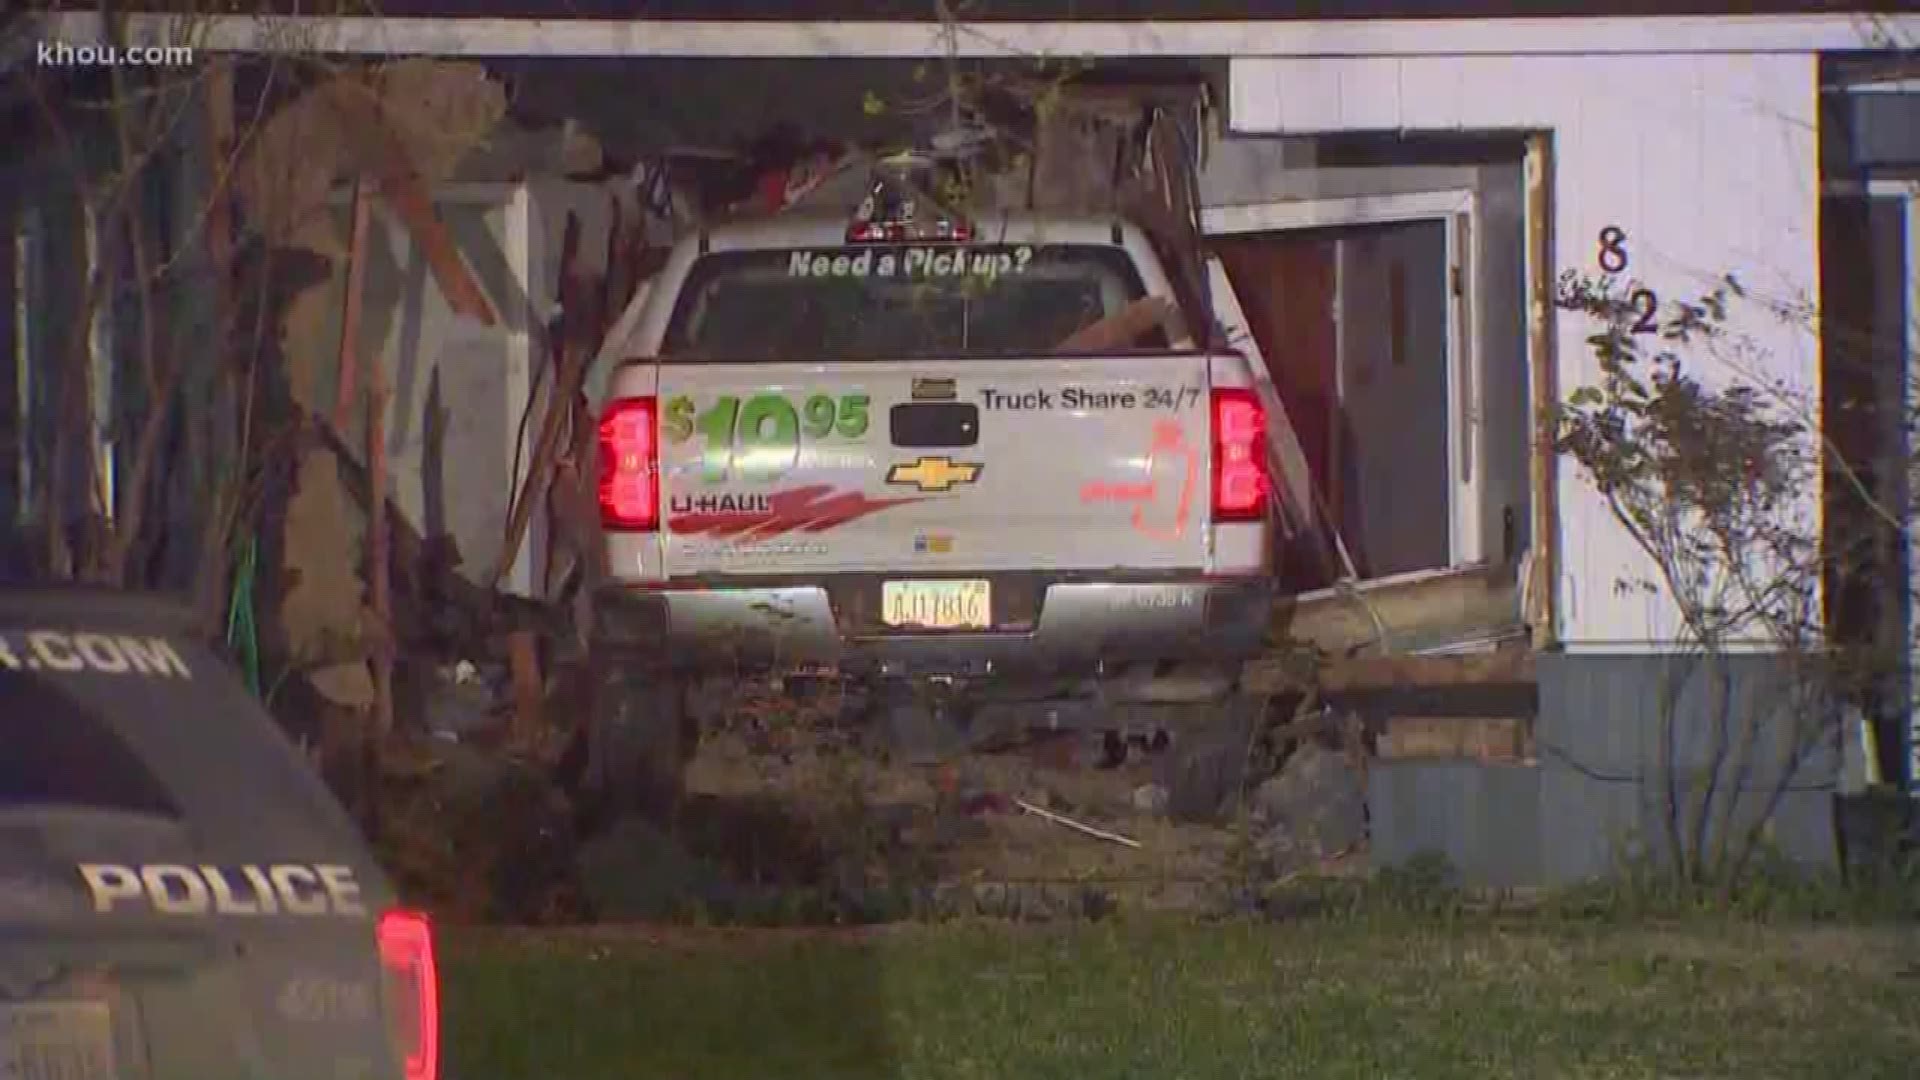 Police are searching for a suspect driver after a U-Haul pickup truck plowed into a home overnight.